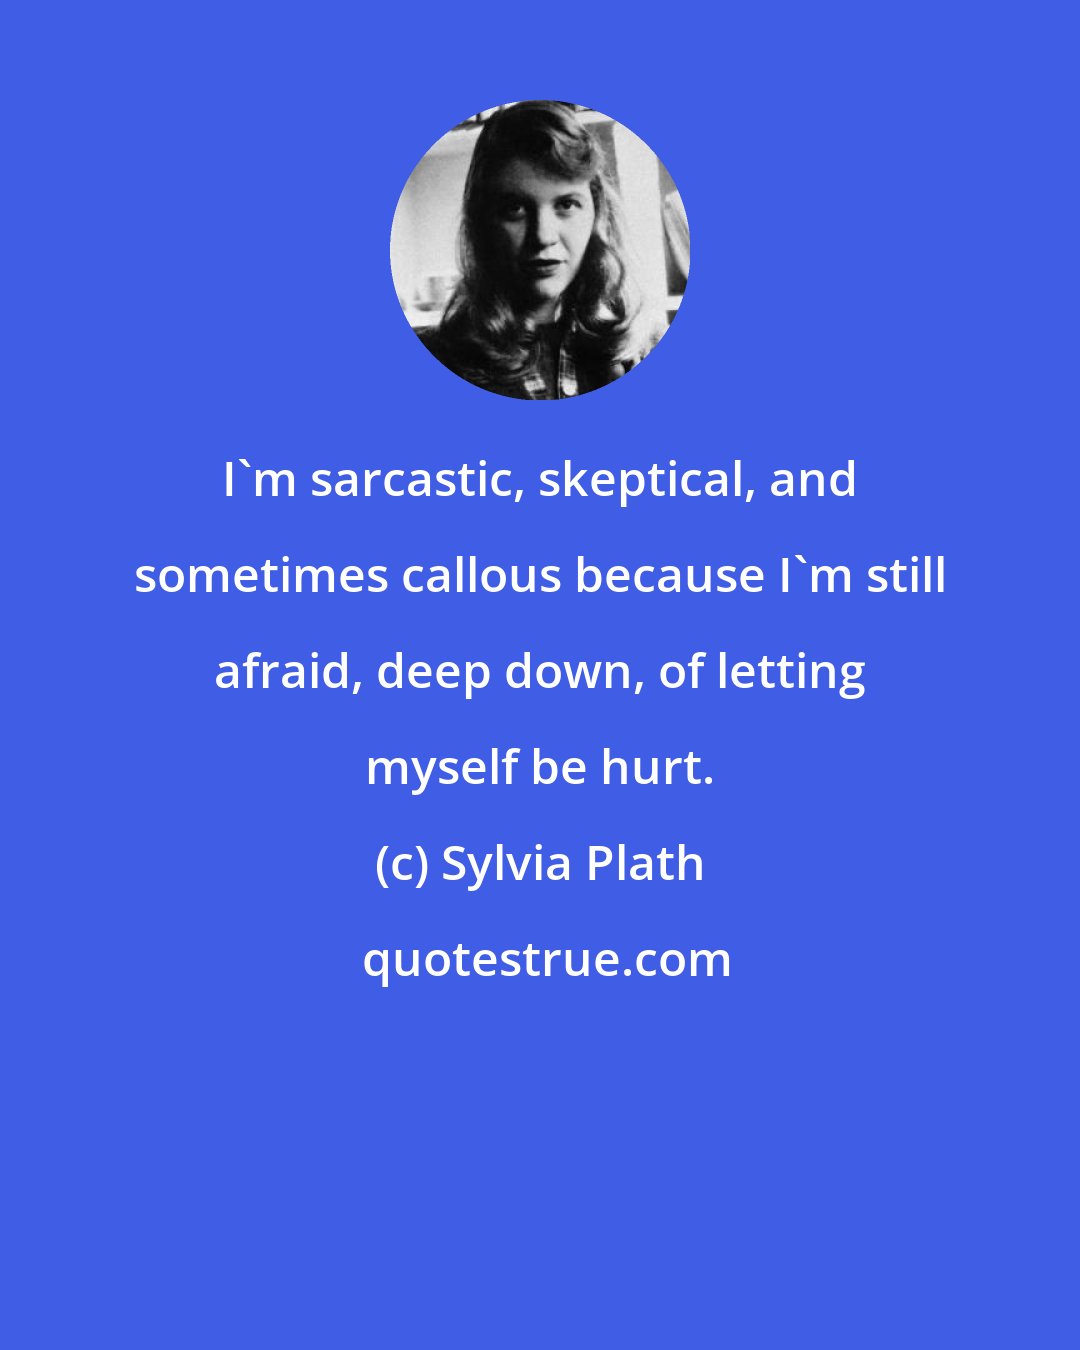 Sylvia Plath: I'm sarcastic, skeptical, and sometimes callous because I'm still afraid, deep down, of letting myself be hurt.